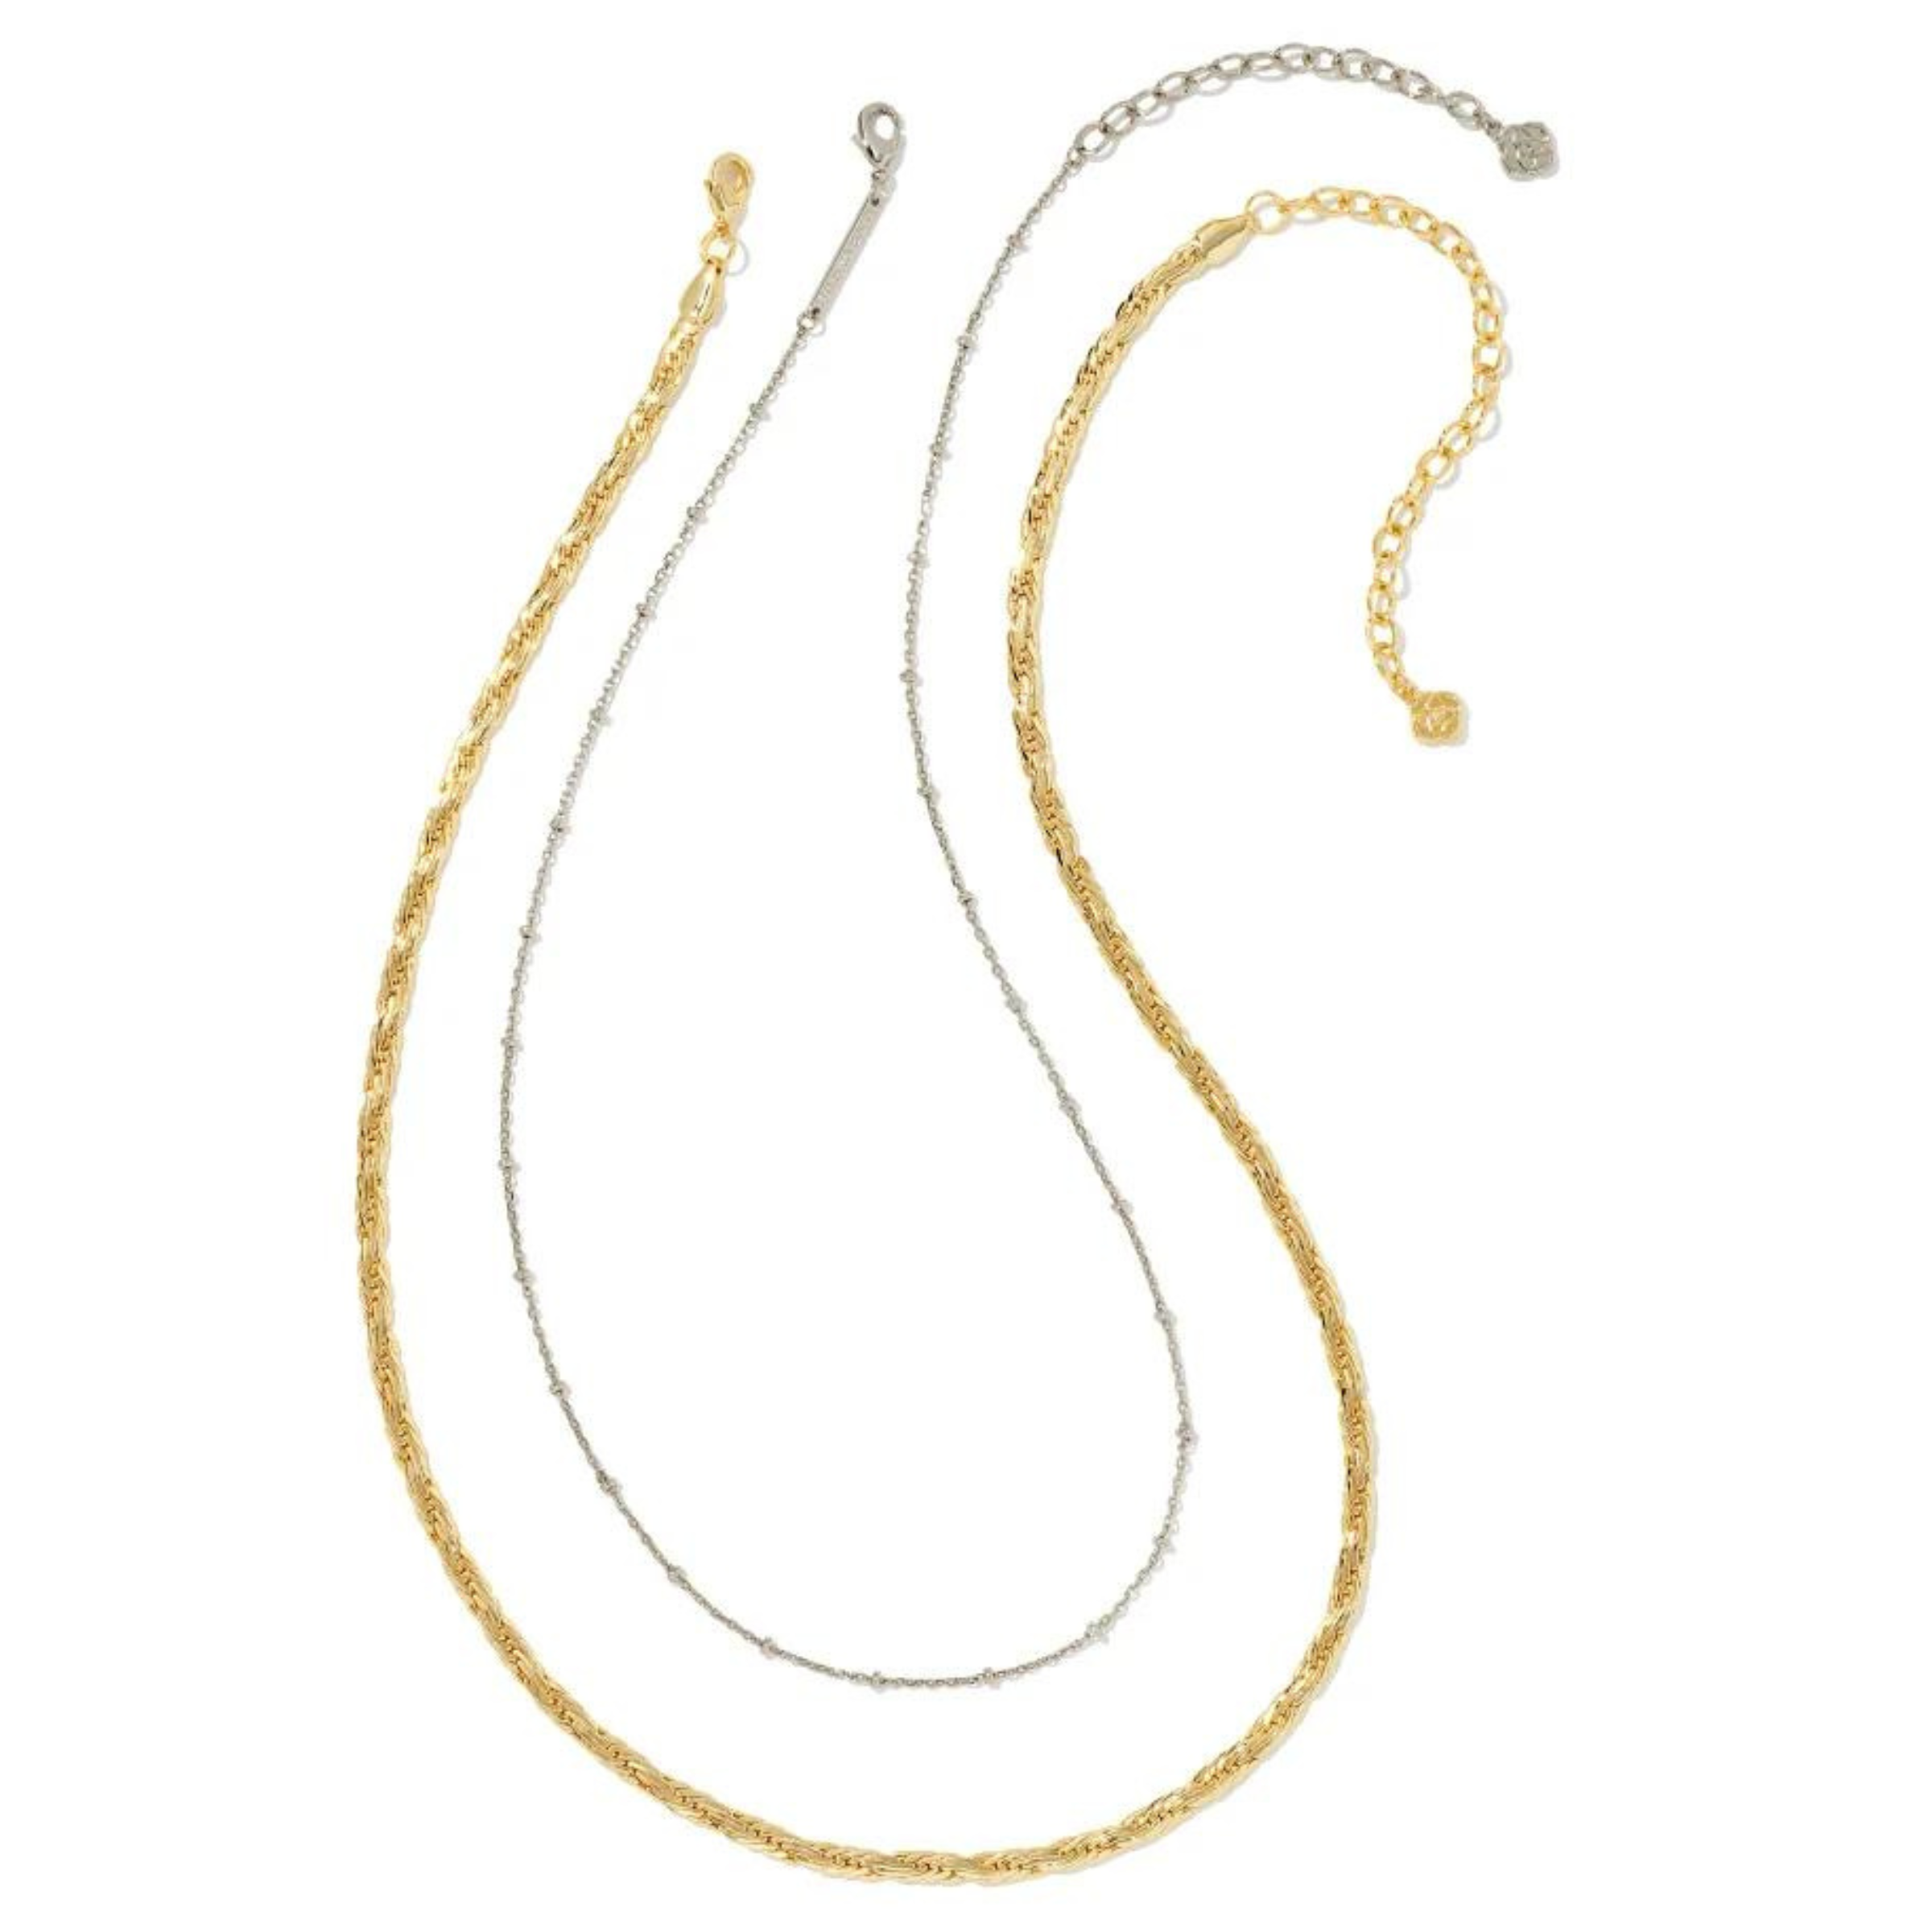 Two chain necklaces, one silver and one gold, pictured on a white background. 